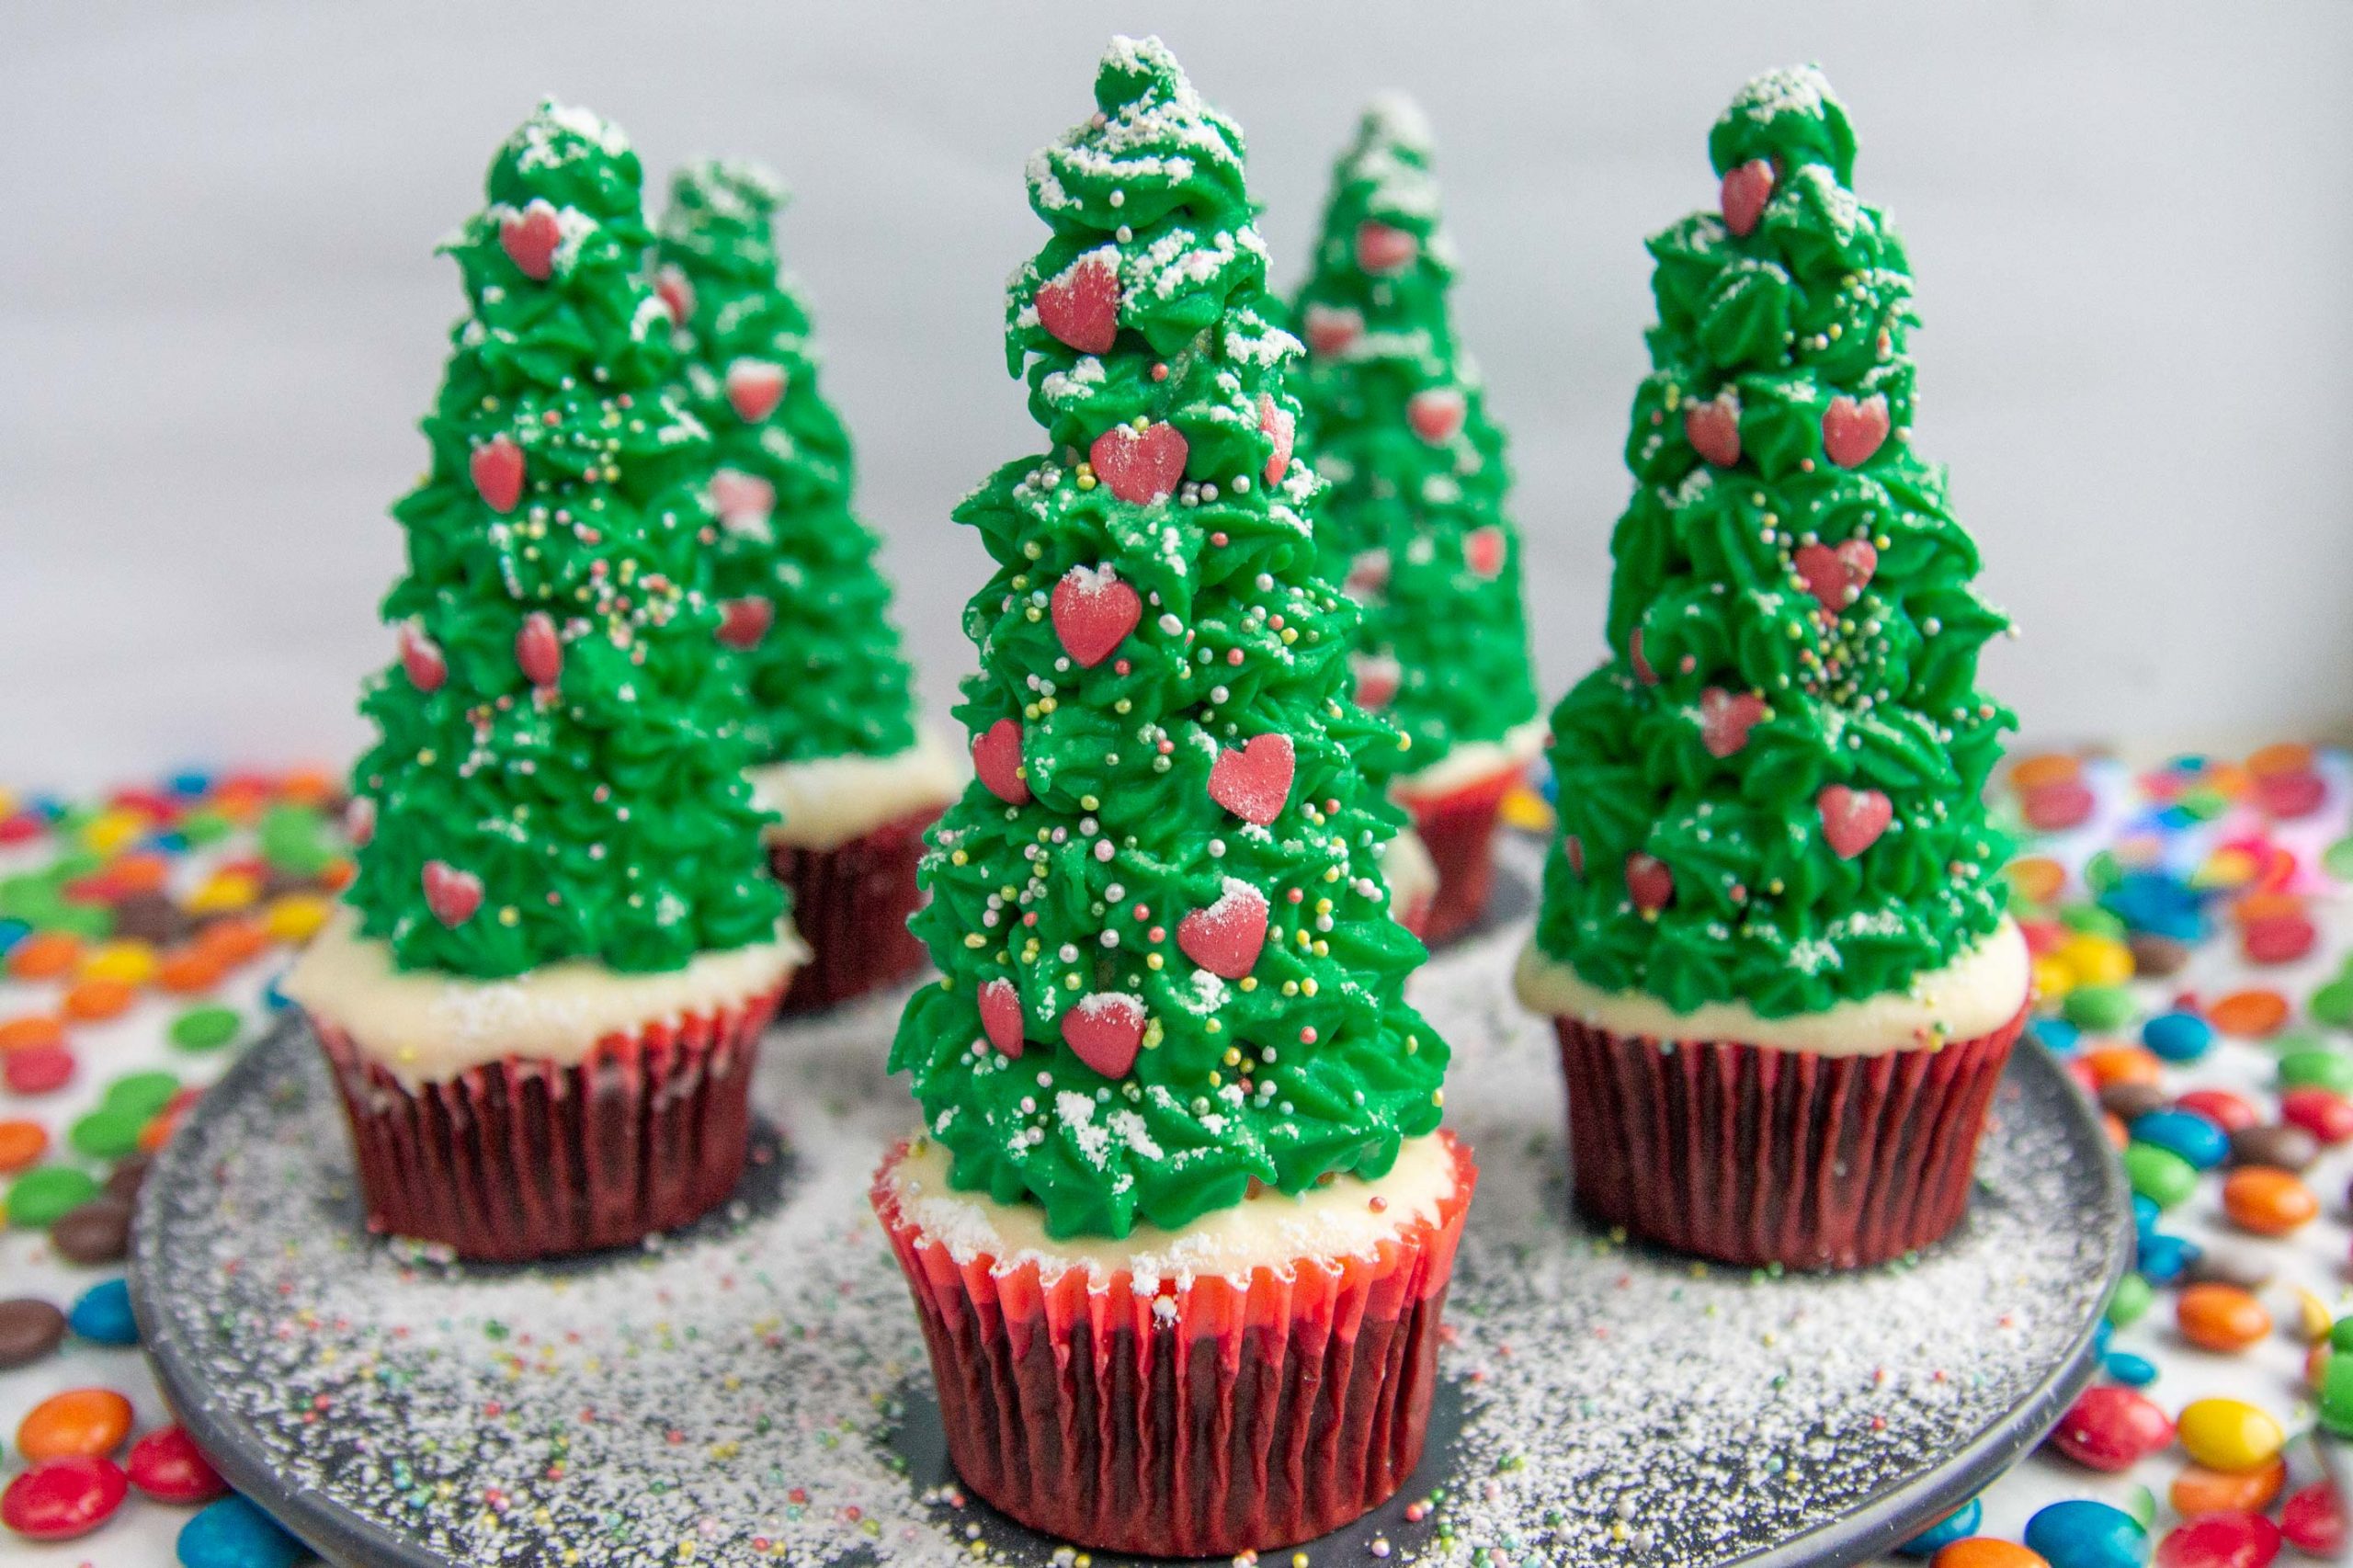 Gorgeous Christmas cupcakes with chocolate and frosting